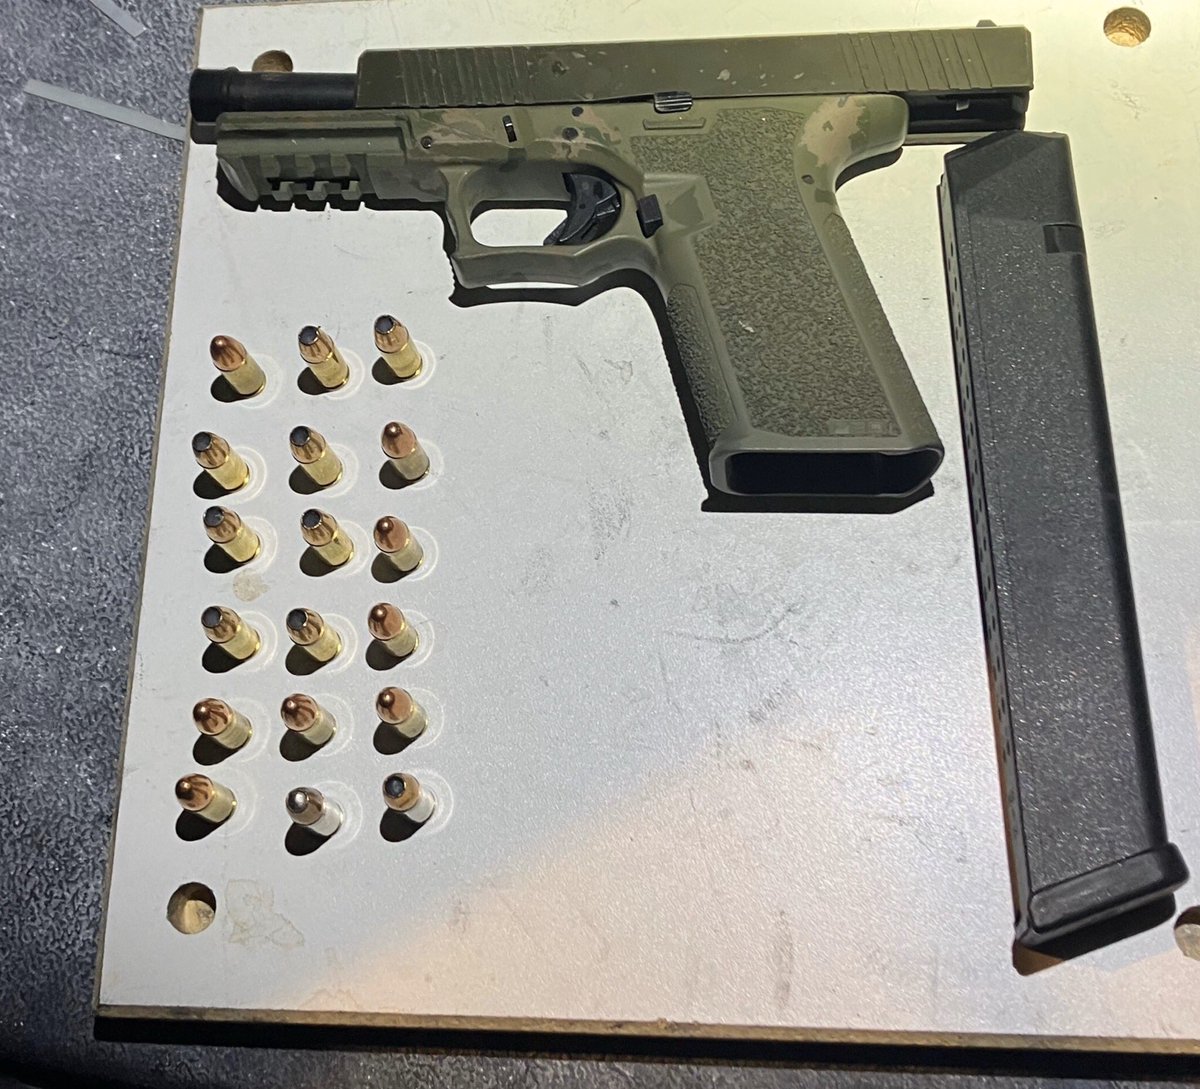 Great Job by our Patrol Officers for getting #Onelessgun off the street!